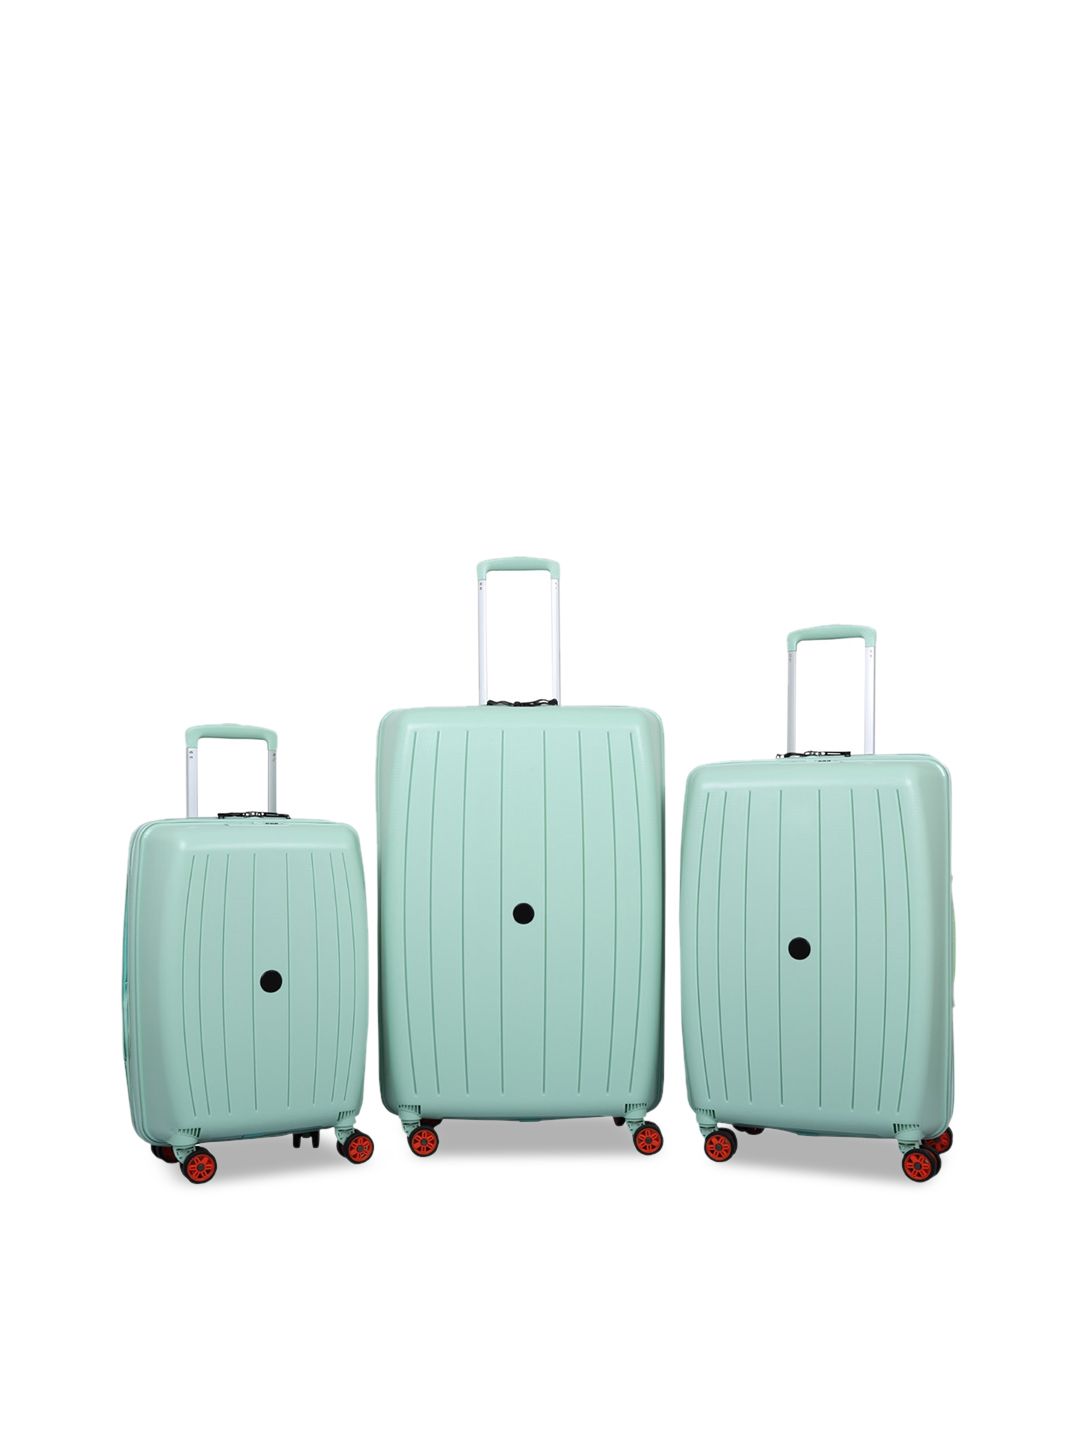 Polo Class Set Of 3 Green Solid Hard-Sided Trolley Suitcases Price in India